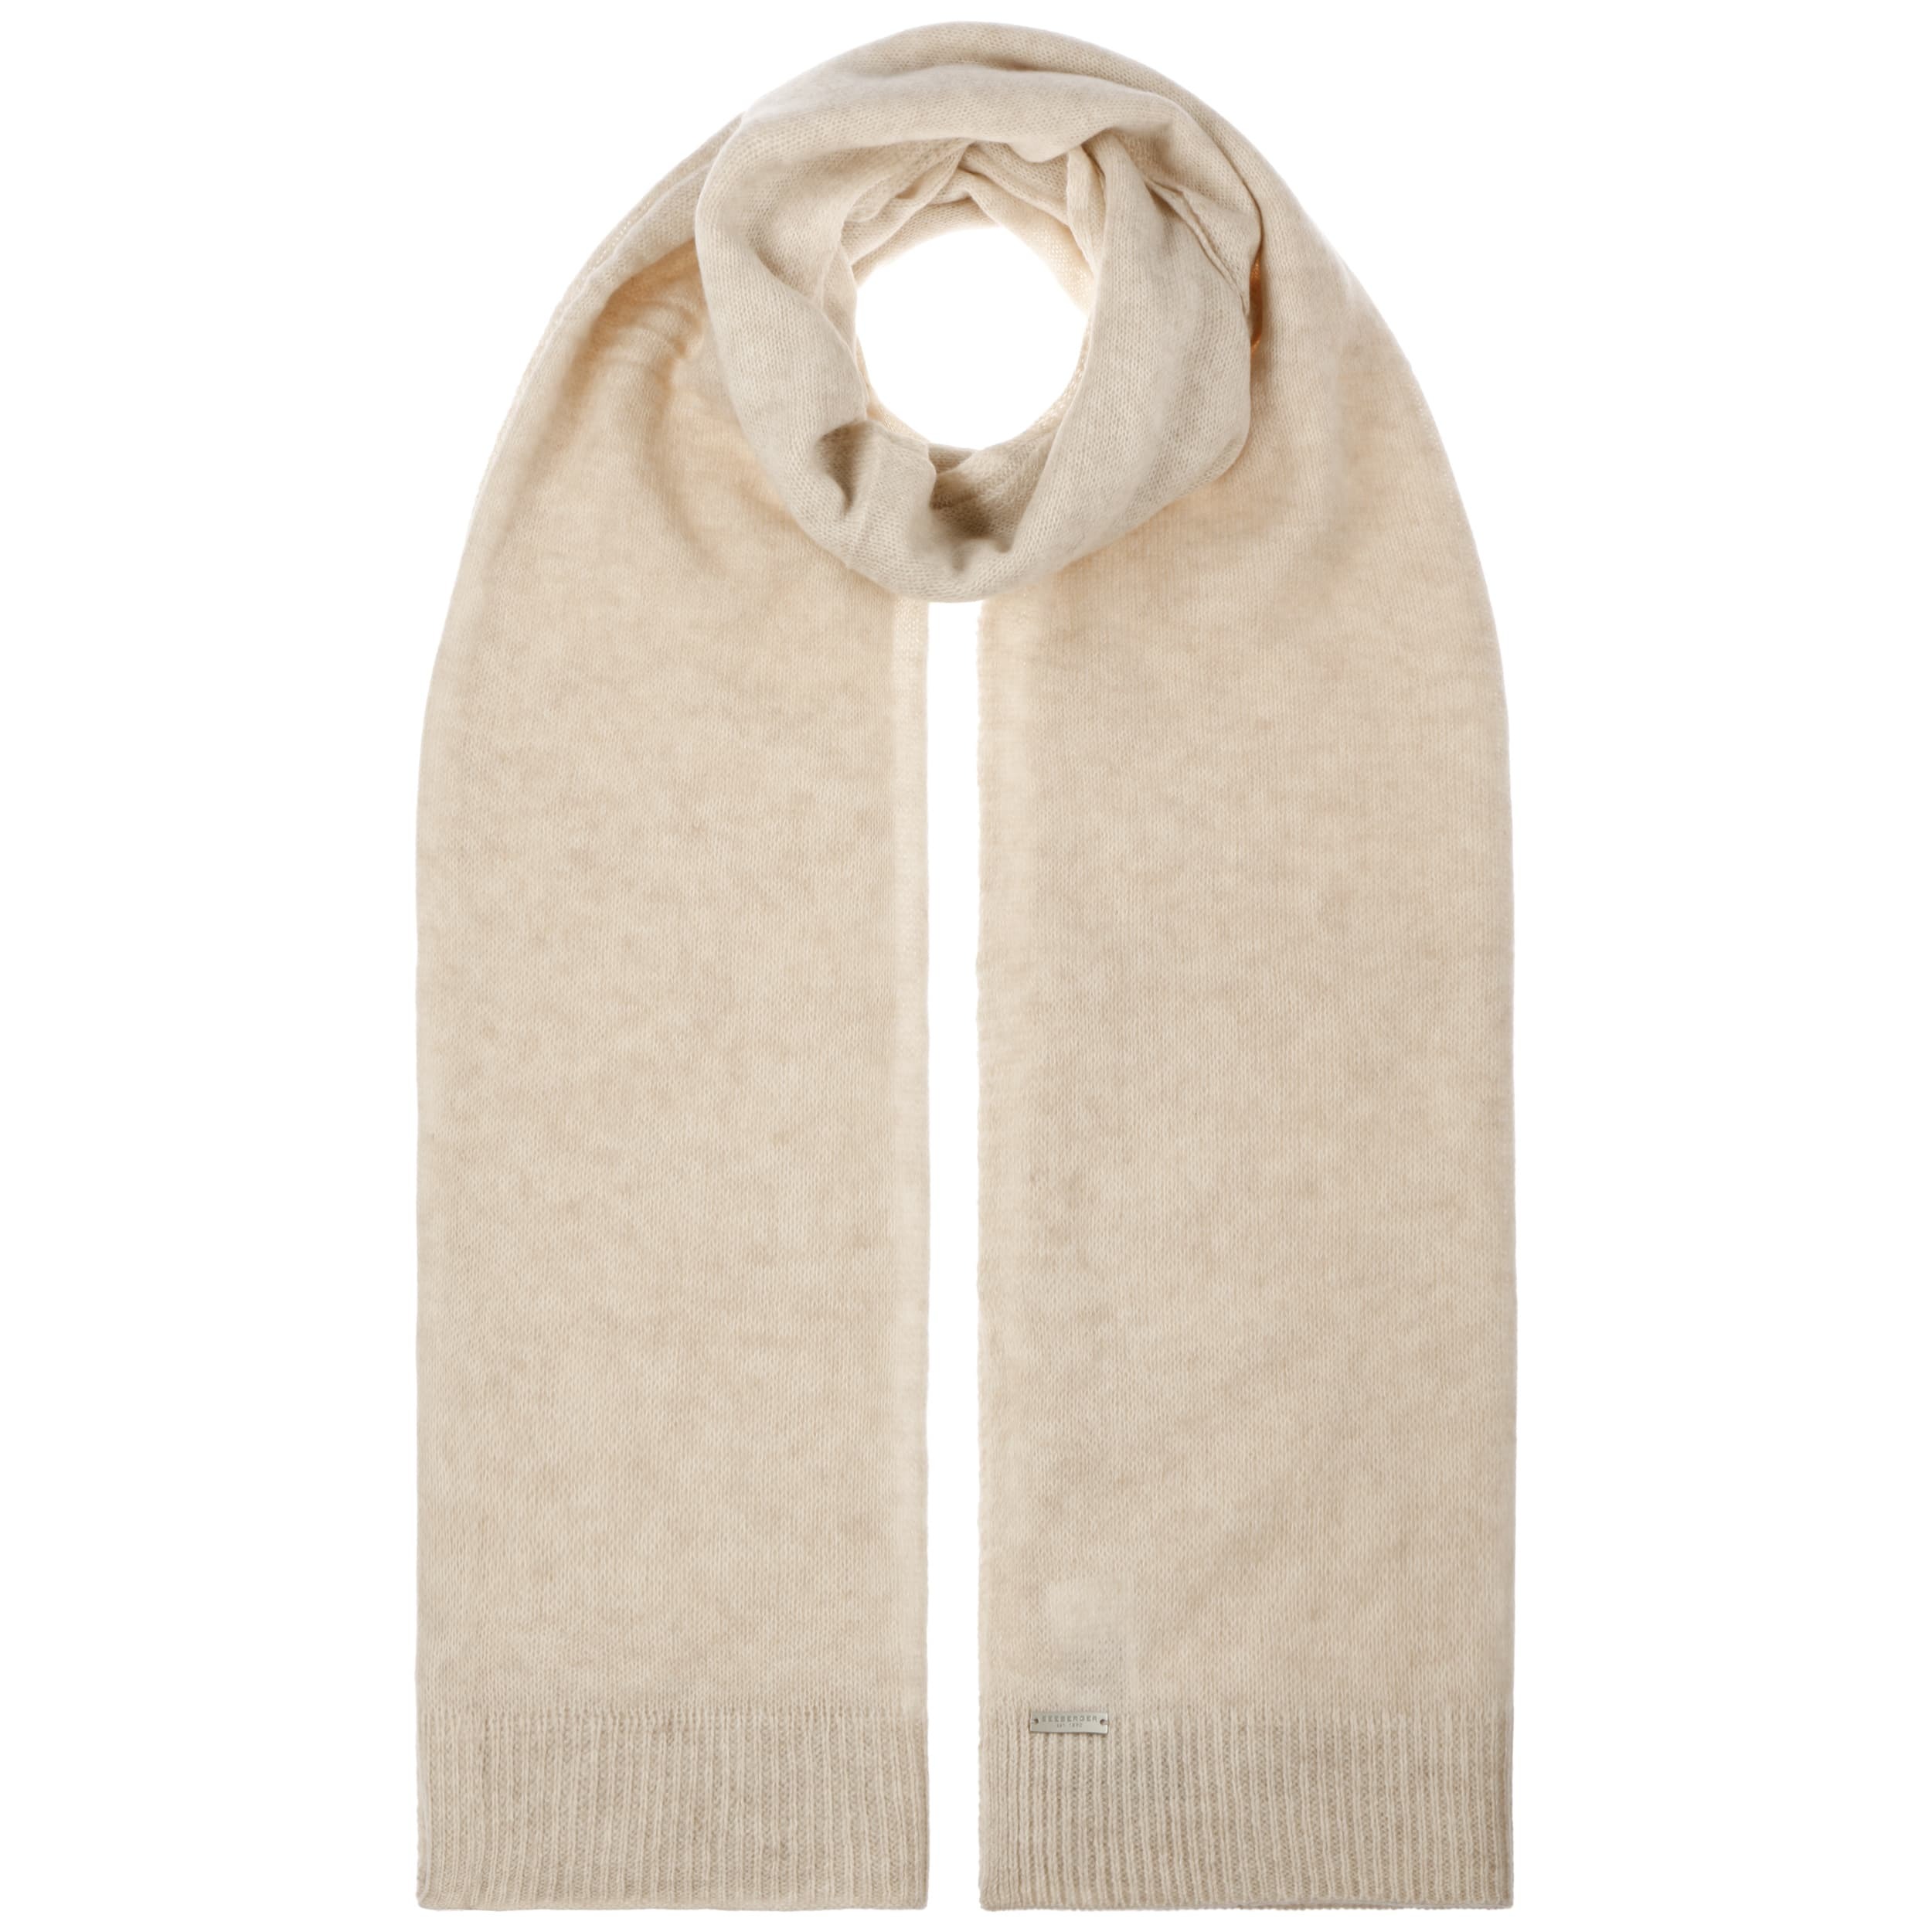 Cashmere Winter Scarf by Seeberger, EUR 149,00 --> Hats, caps & beanies ...